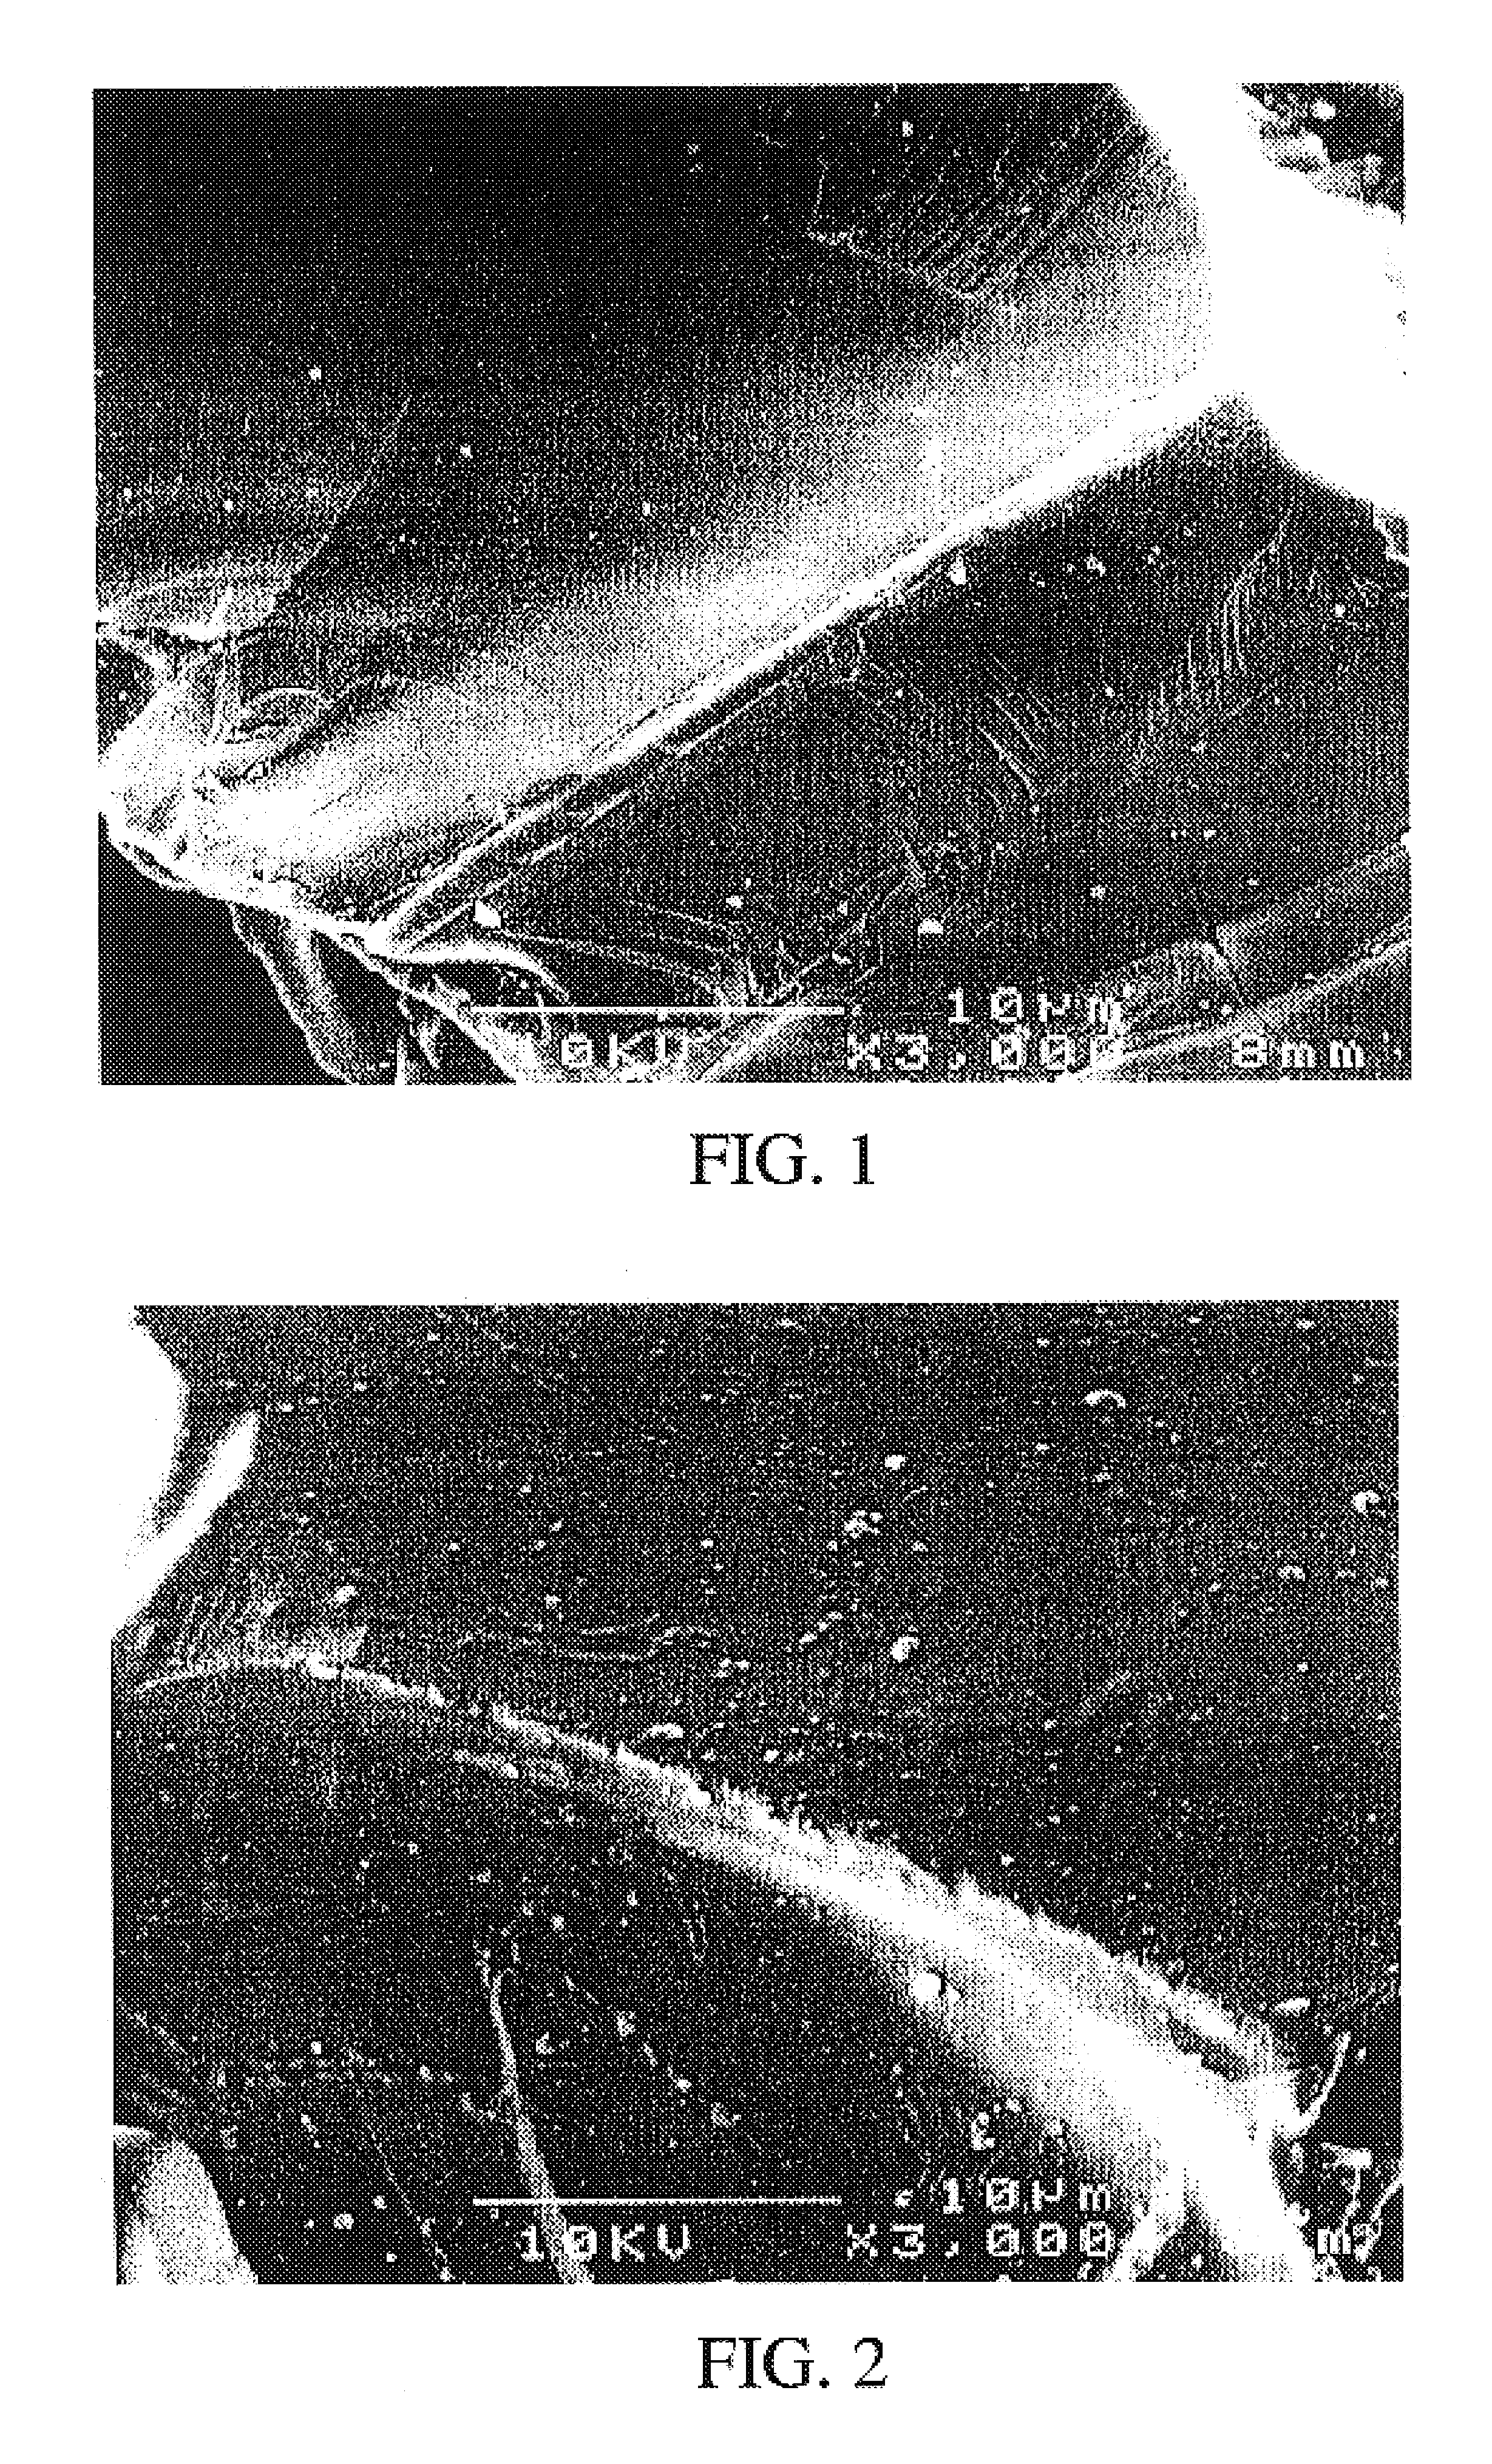 Surface-coated hard material, production method for this, and use of the same